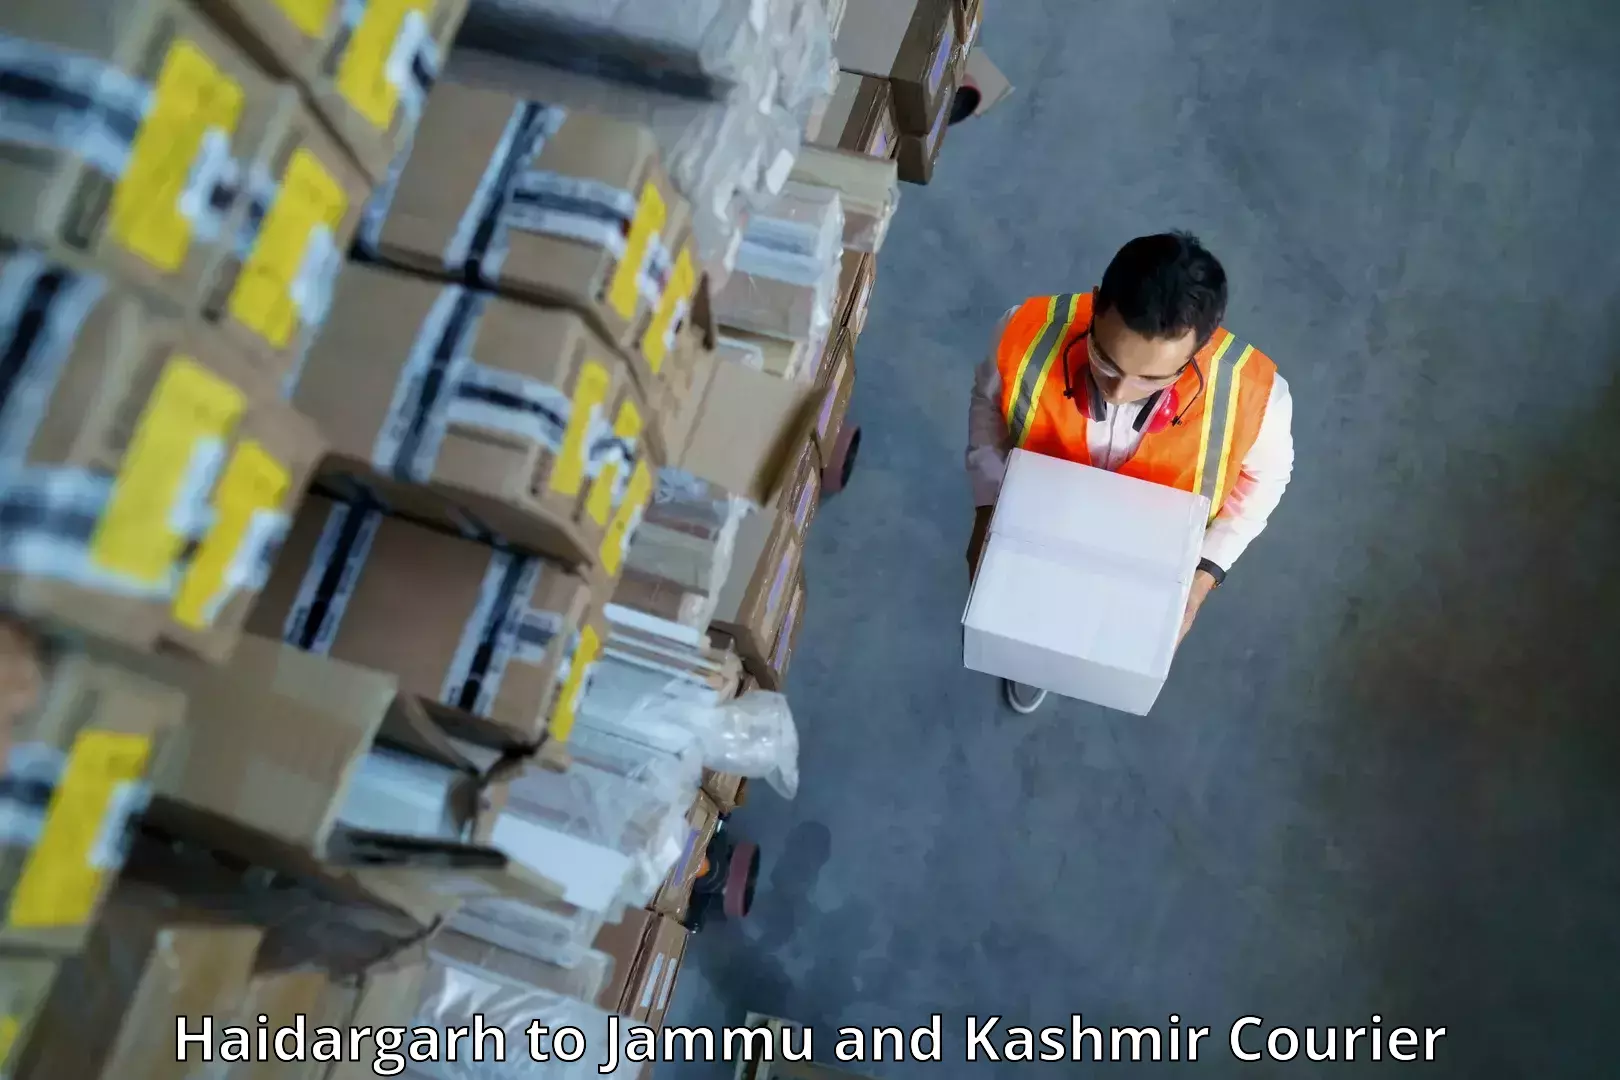 Automated parcel services Haidargarh to Pulwama